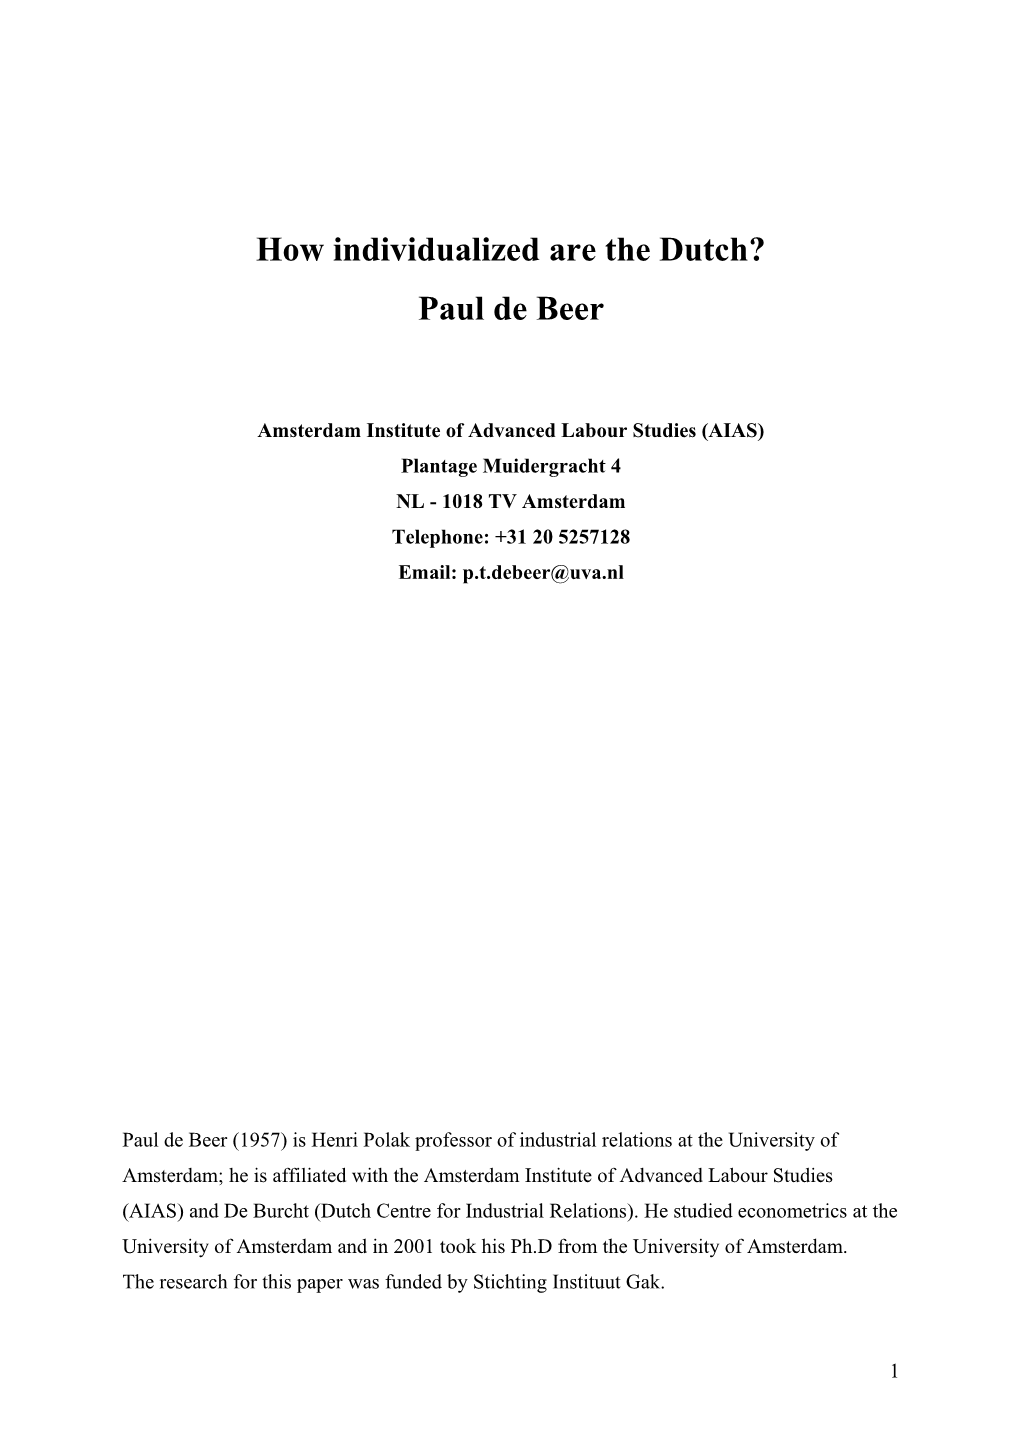 How Individualized Are the Dutch